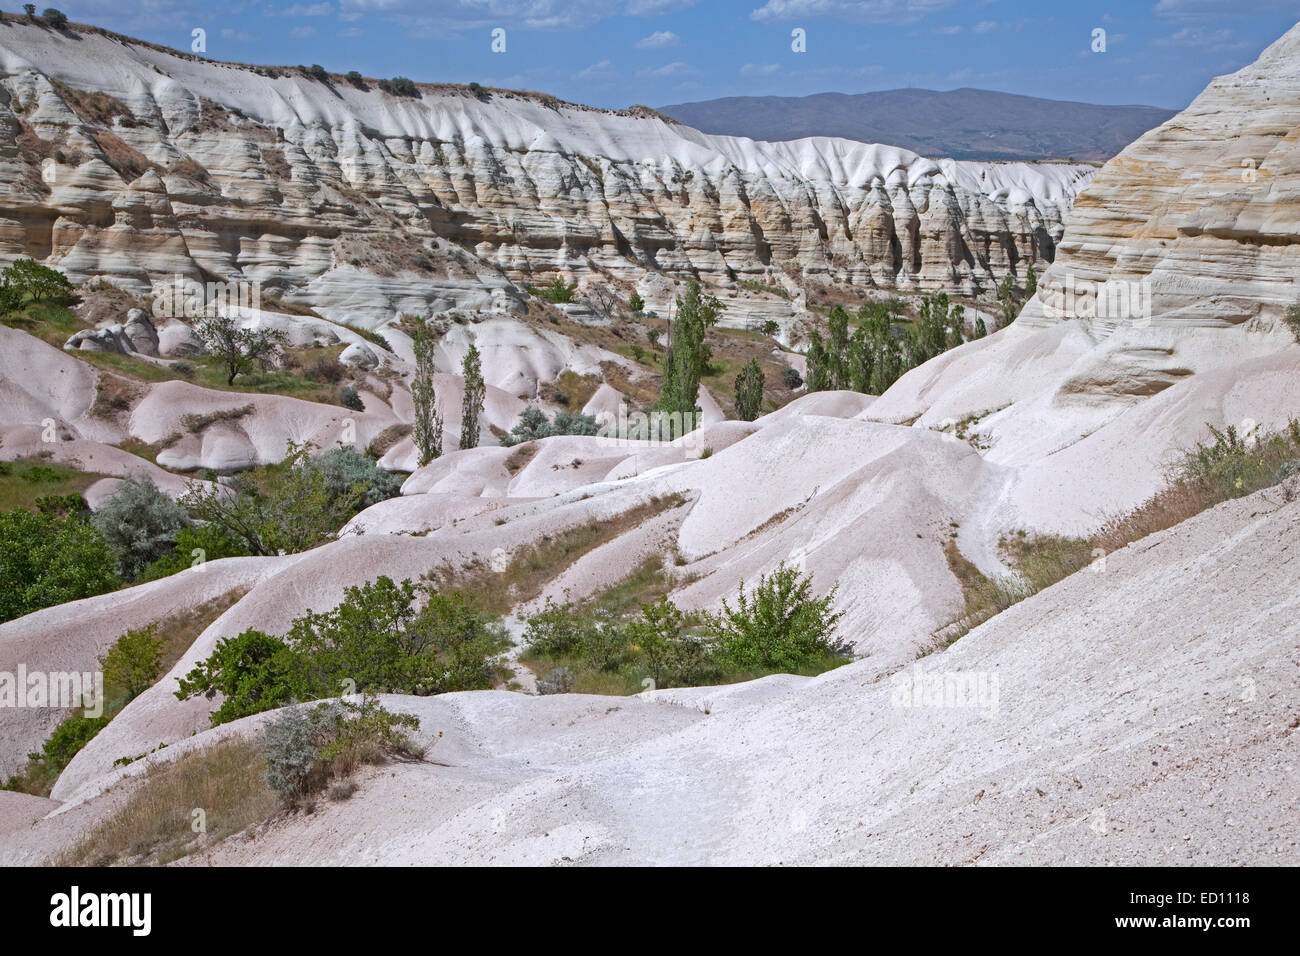 Eroded white and pink sandstone rock formations at Cappadocia in Central Anatolia, Turkey Stock Photo